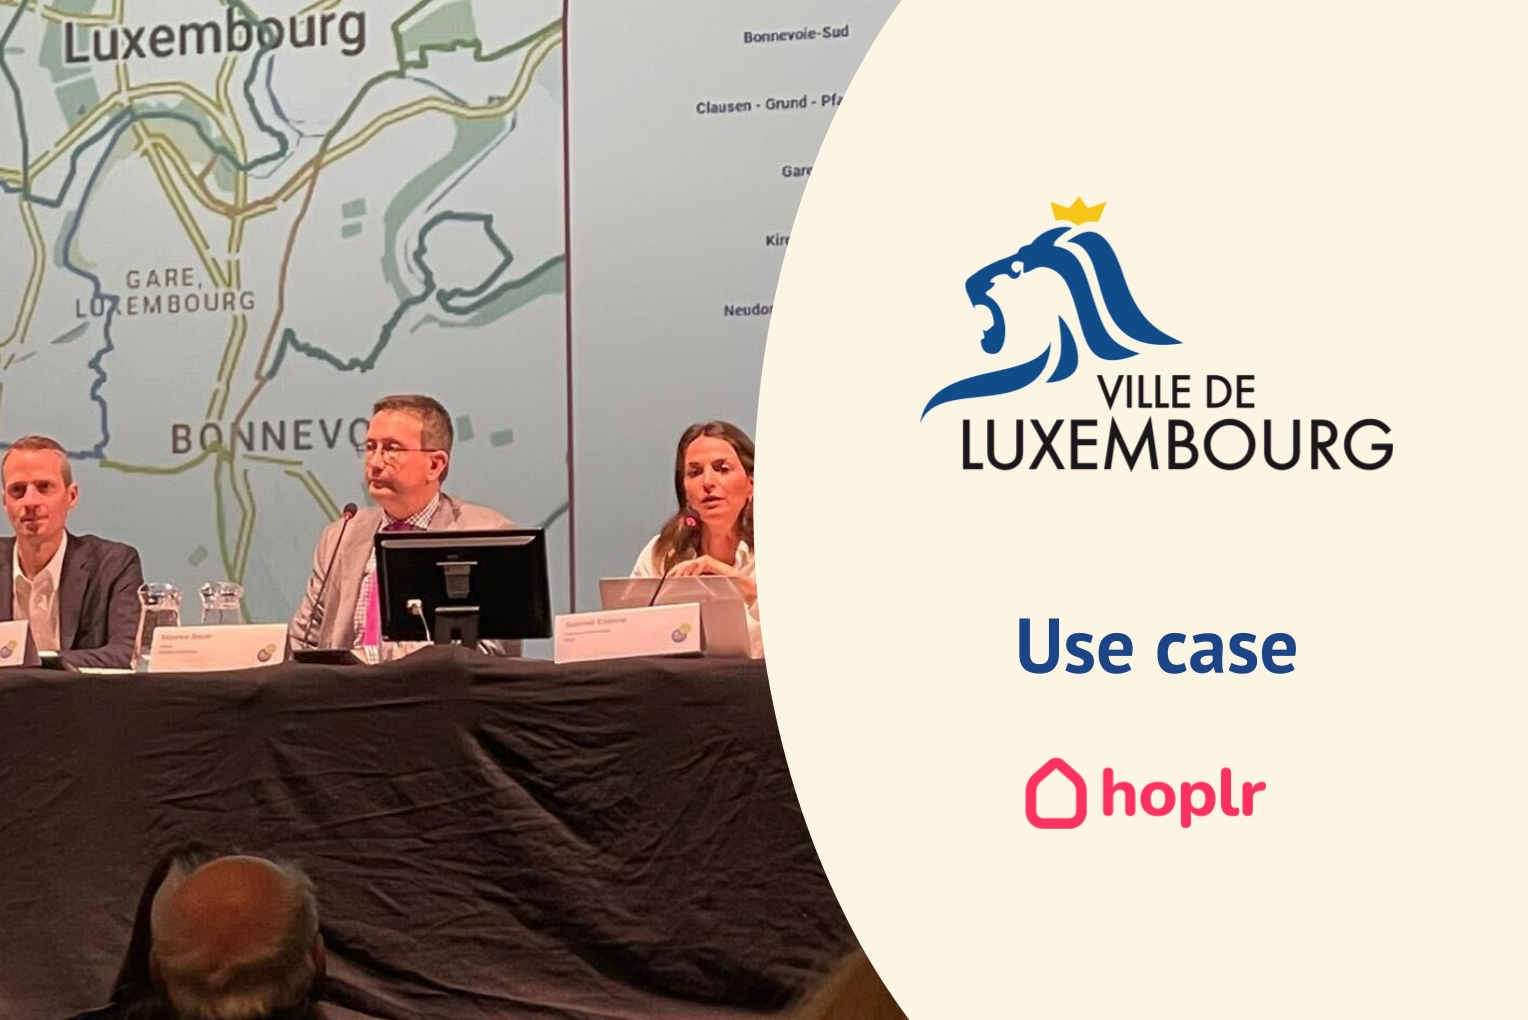 City of Luxembourg: Community development in the face of great diversity